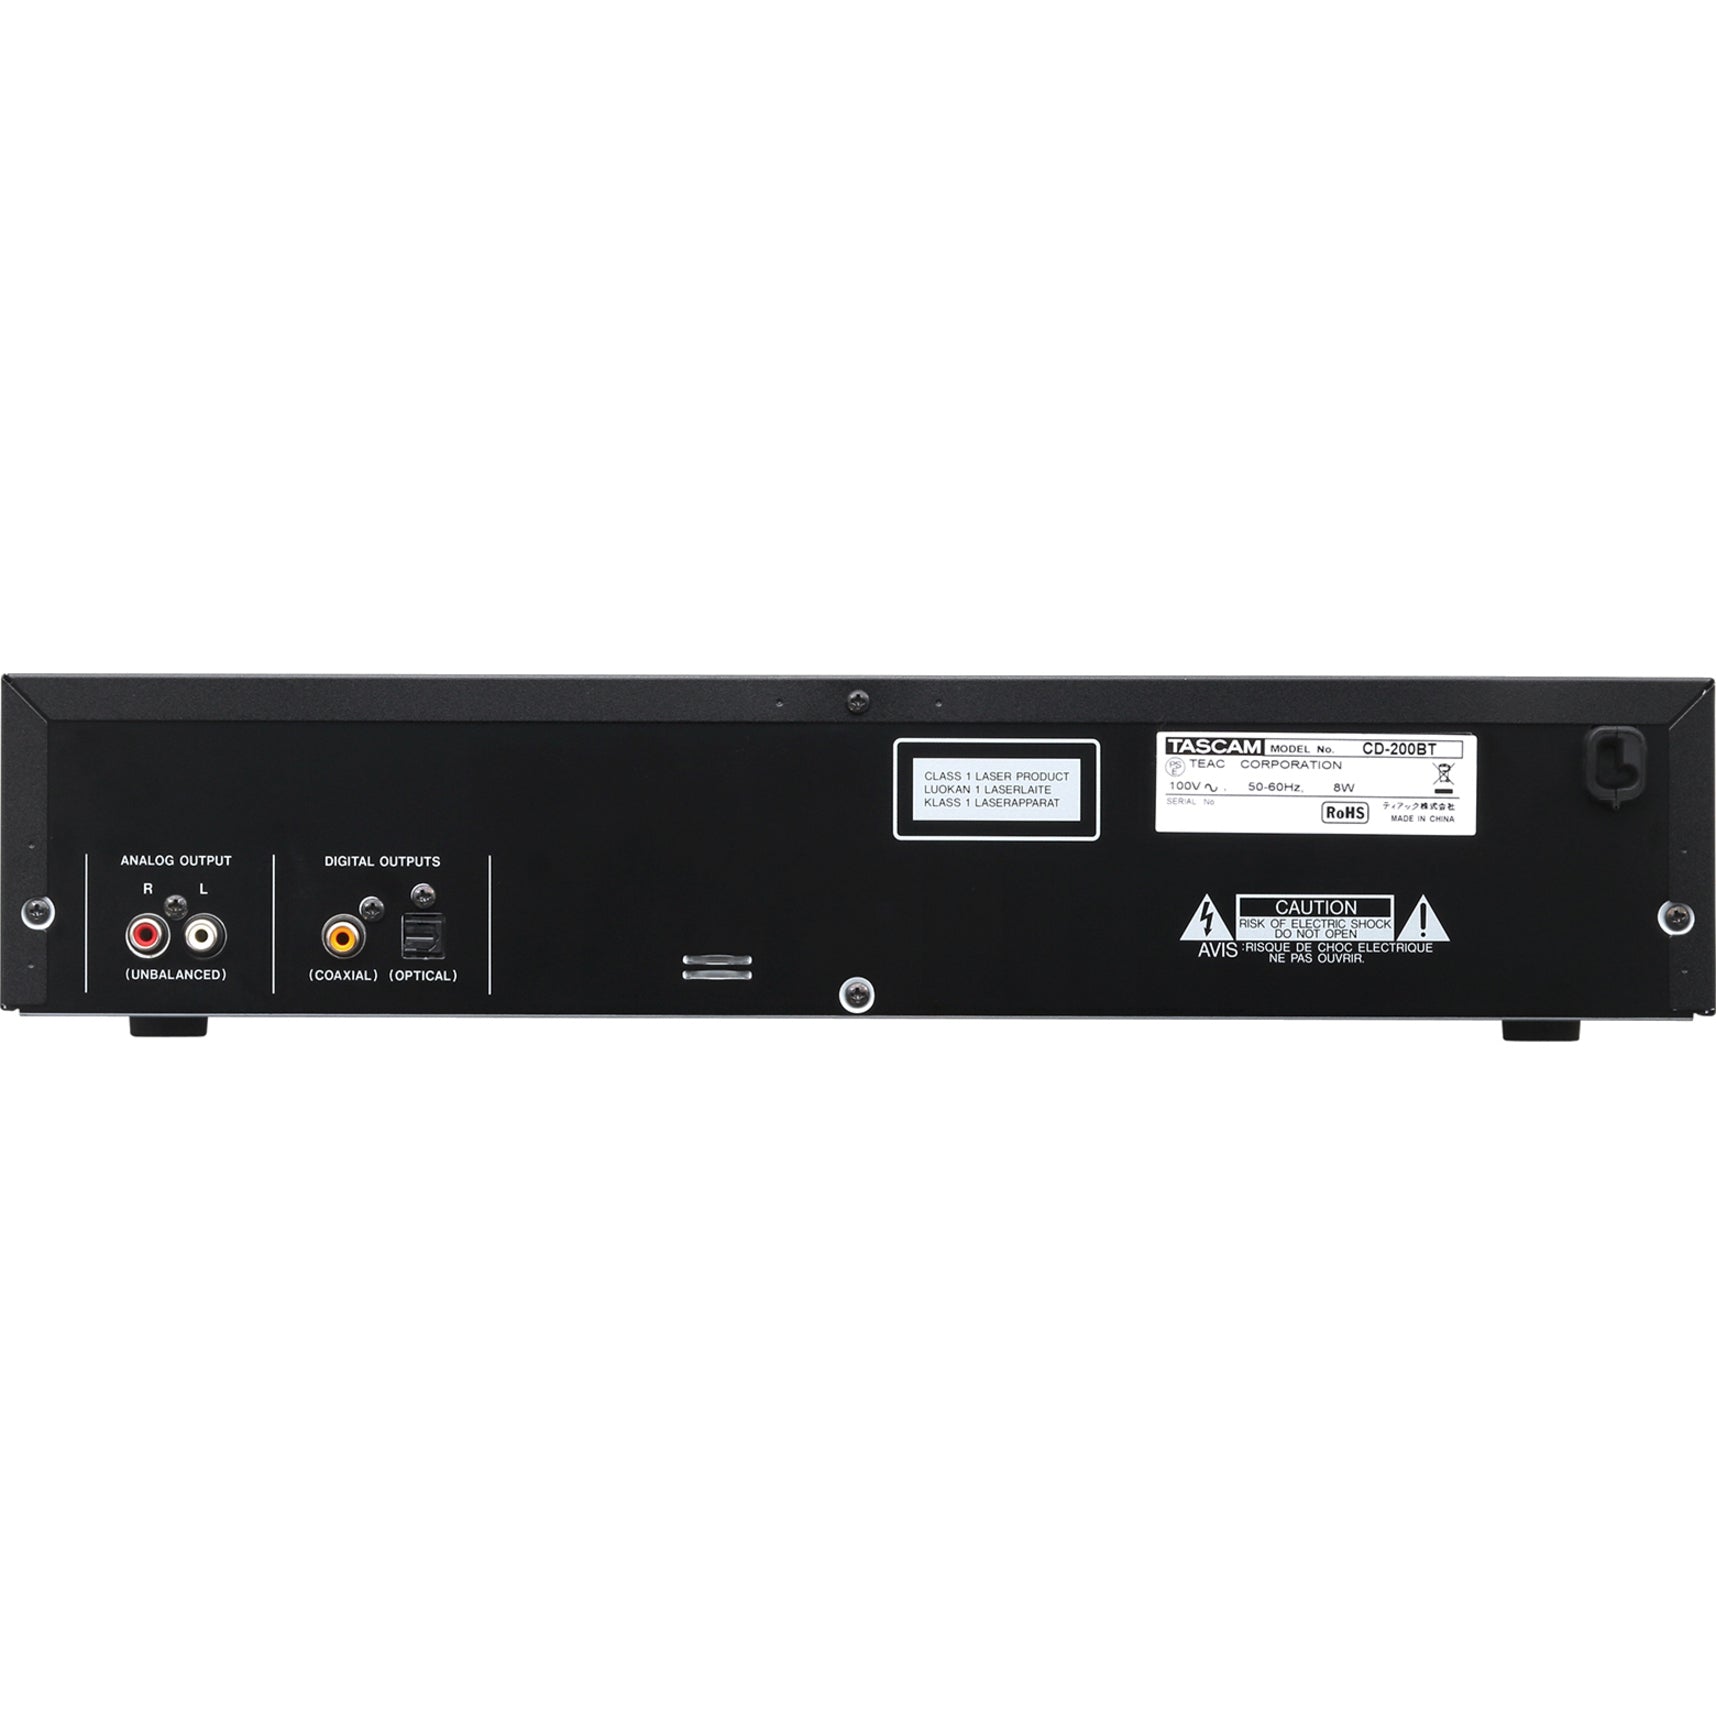 TASCAM CD-200BT Professional CD Player with Bluetooth Receiver, 1 Year Warranty, Rack-mountable